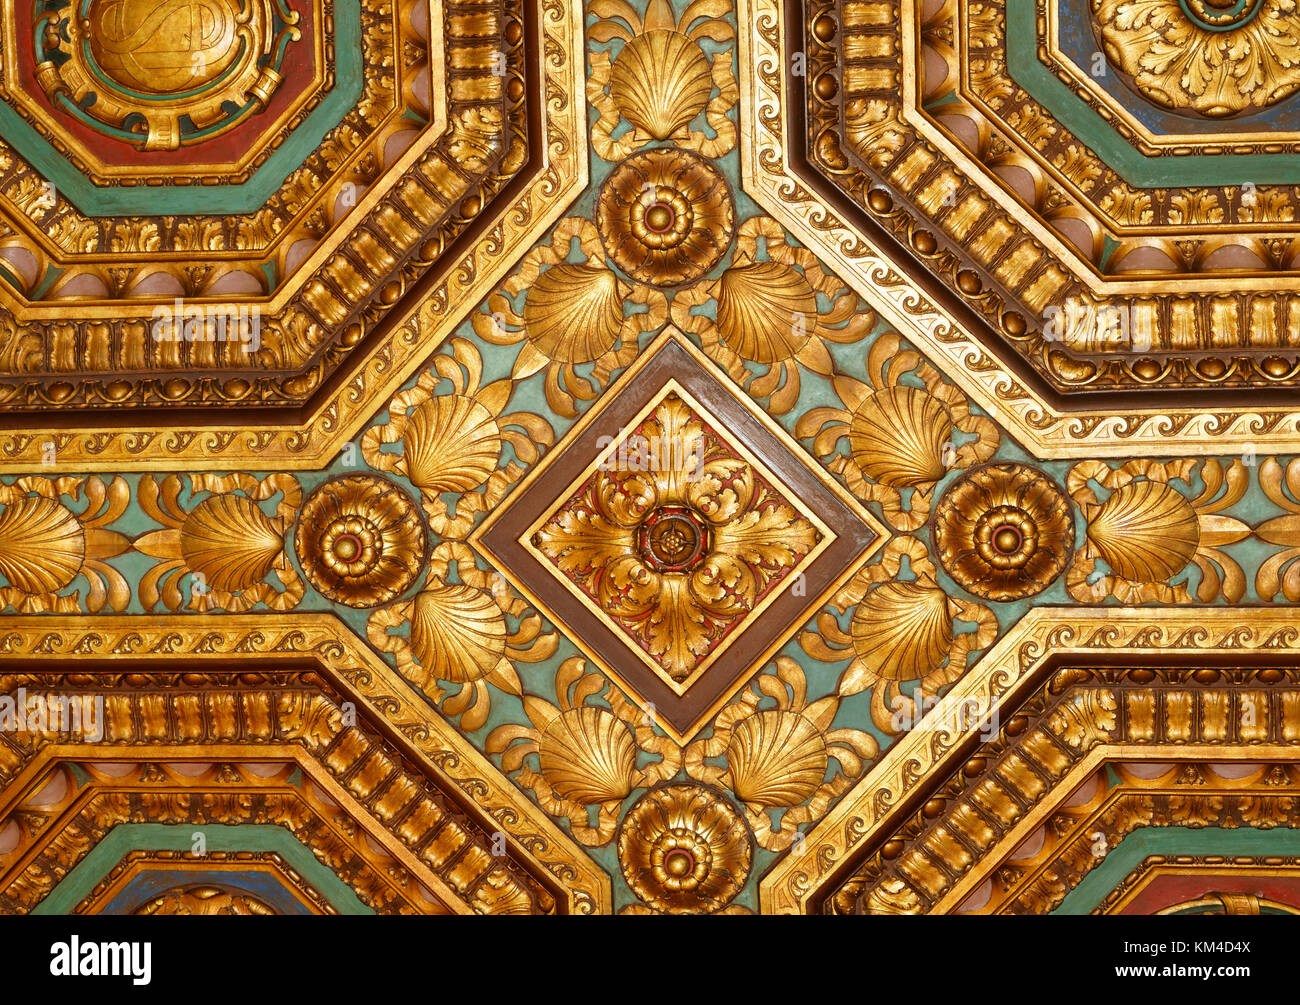 The ornate ceiling of the Collectors Room in the Alexander Hamilton U.S. Custom House (now the National Museum of the American Indian) in Manhattan. Stock Photo